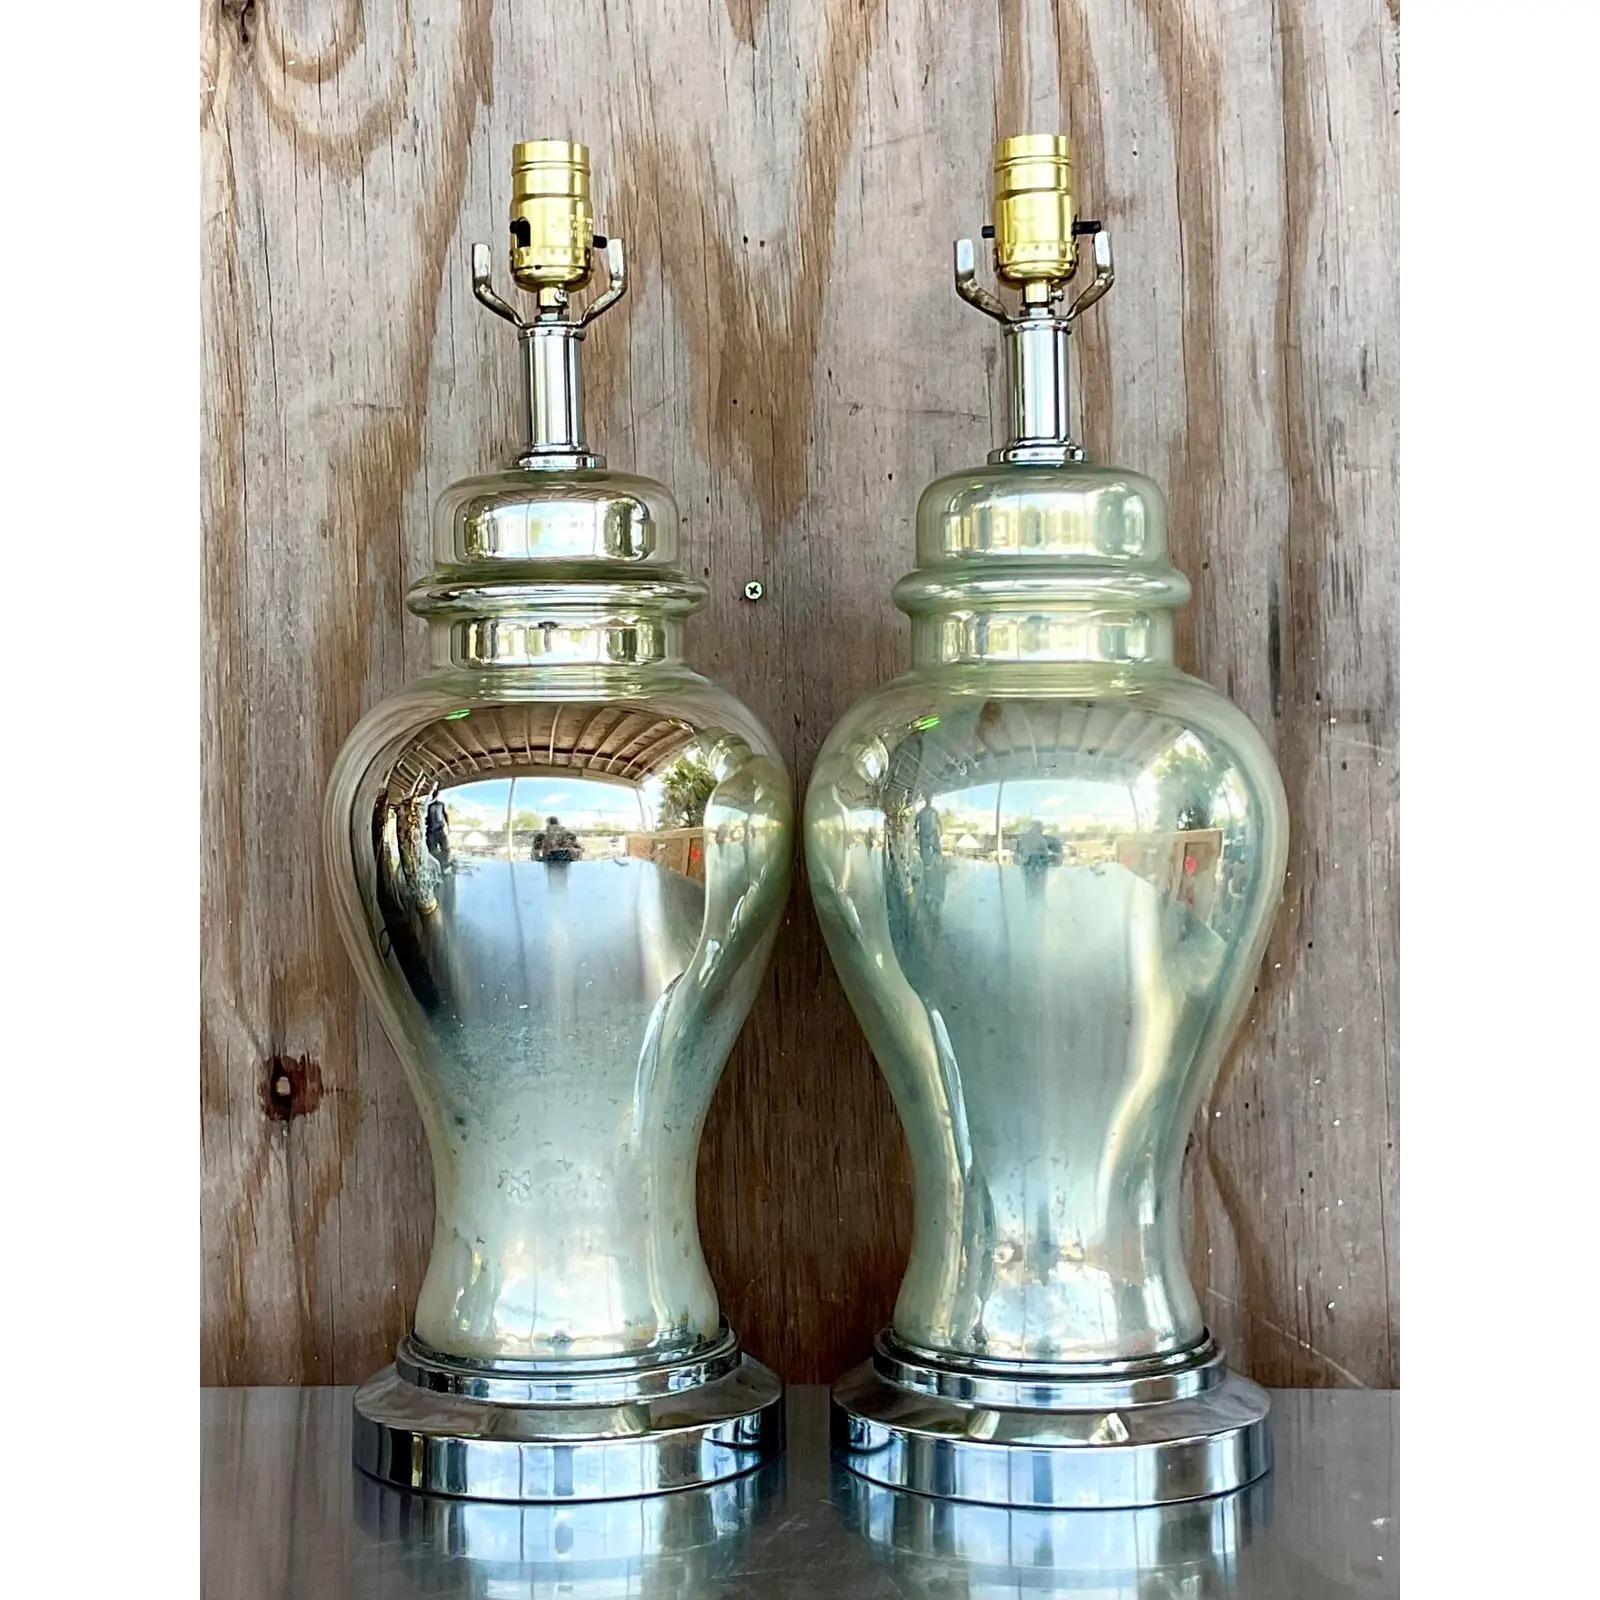 Outstanding pair of vintage Boho table lamps. Beautiful ginger jar shape in antique mercury glass. Fabulous distressed patina from the passage of time. Just the most perfect amount. Rest on chrome plinths. Acquired from a Palm Beach estate.